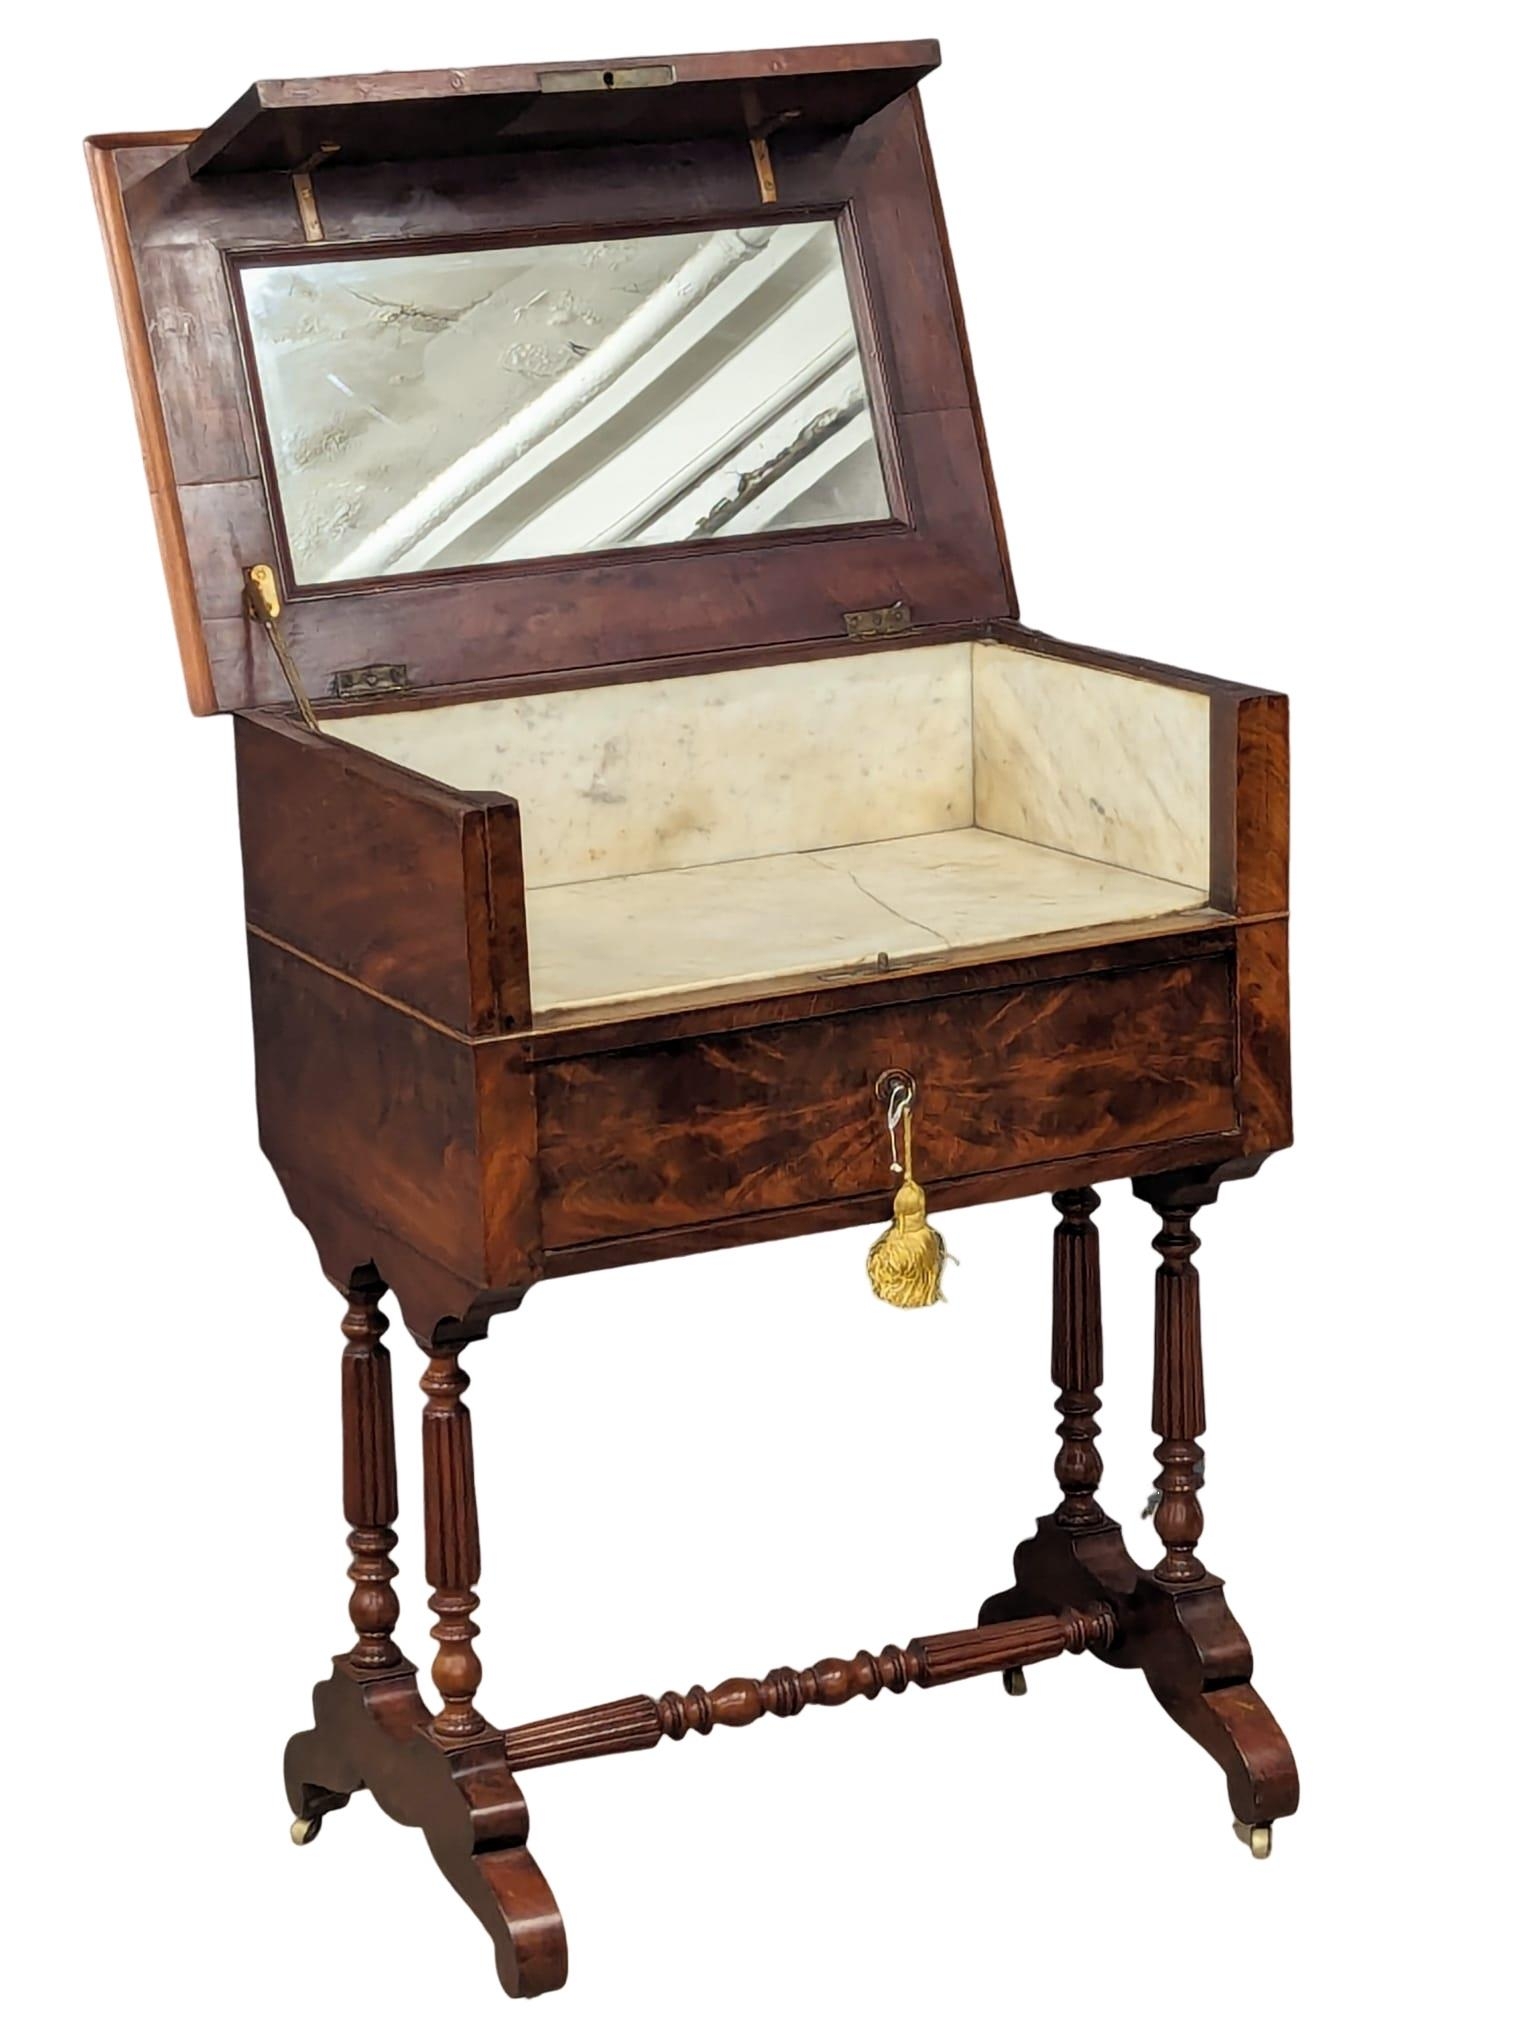 A 19th Century French mahogany washstand / dressing table on reeded turned legs and stretcher. Circa - Image 2 of 7